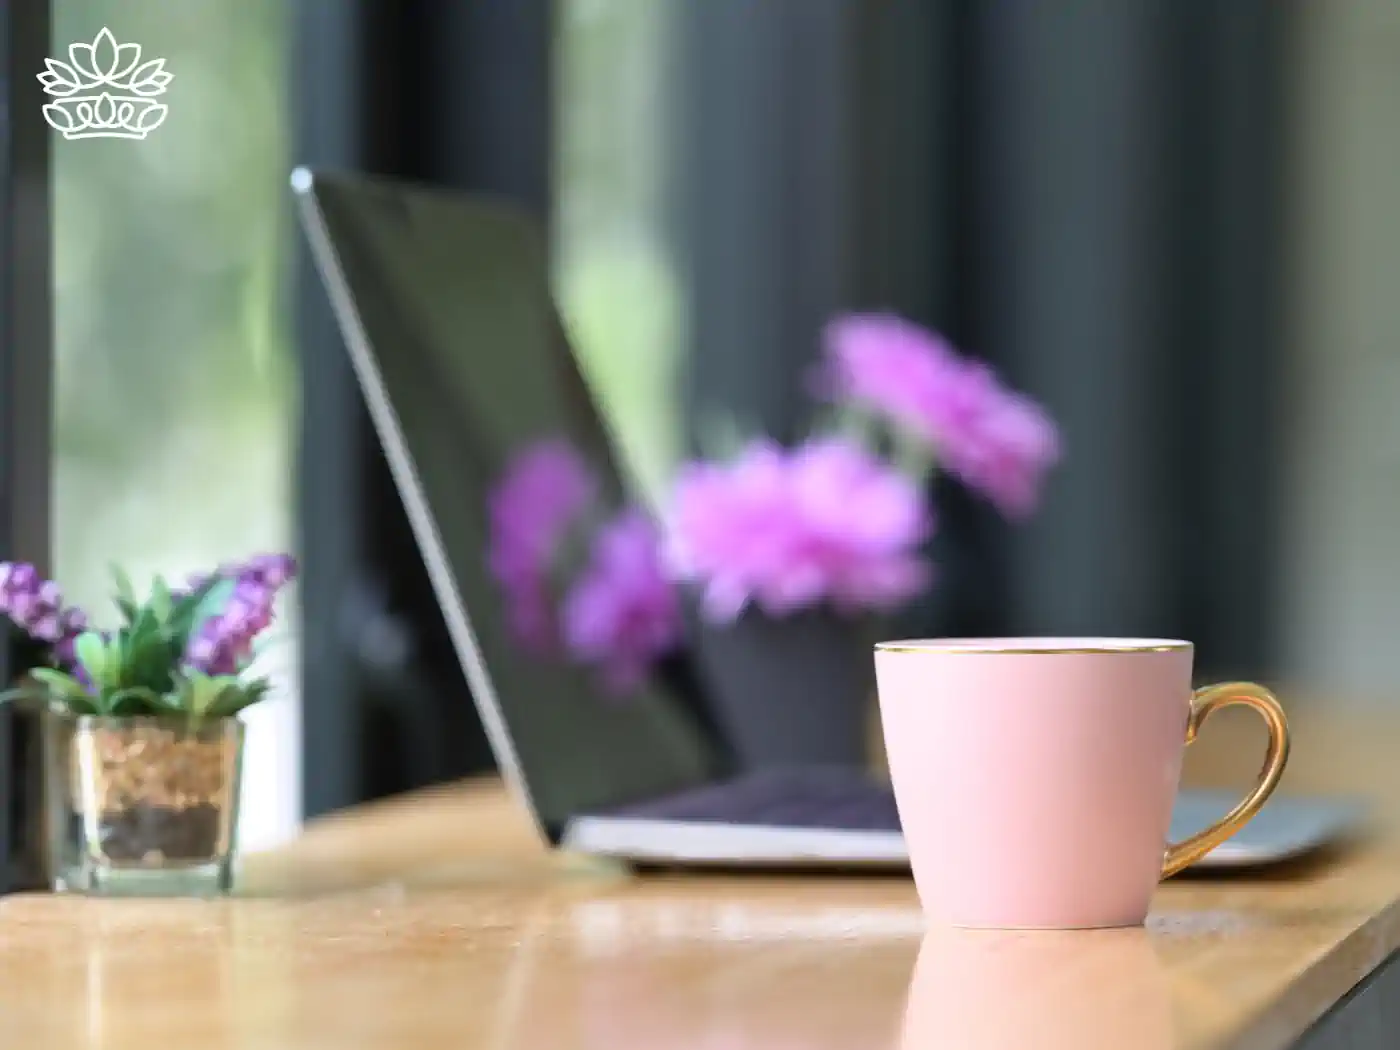 A stylish office setup featuring purple flowers and a pink mug beside a laptop. Fabulous Flowers and Gifts. Office Desk Flowers Collection.